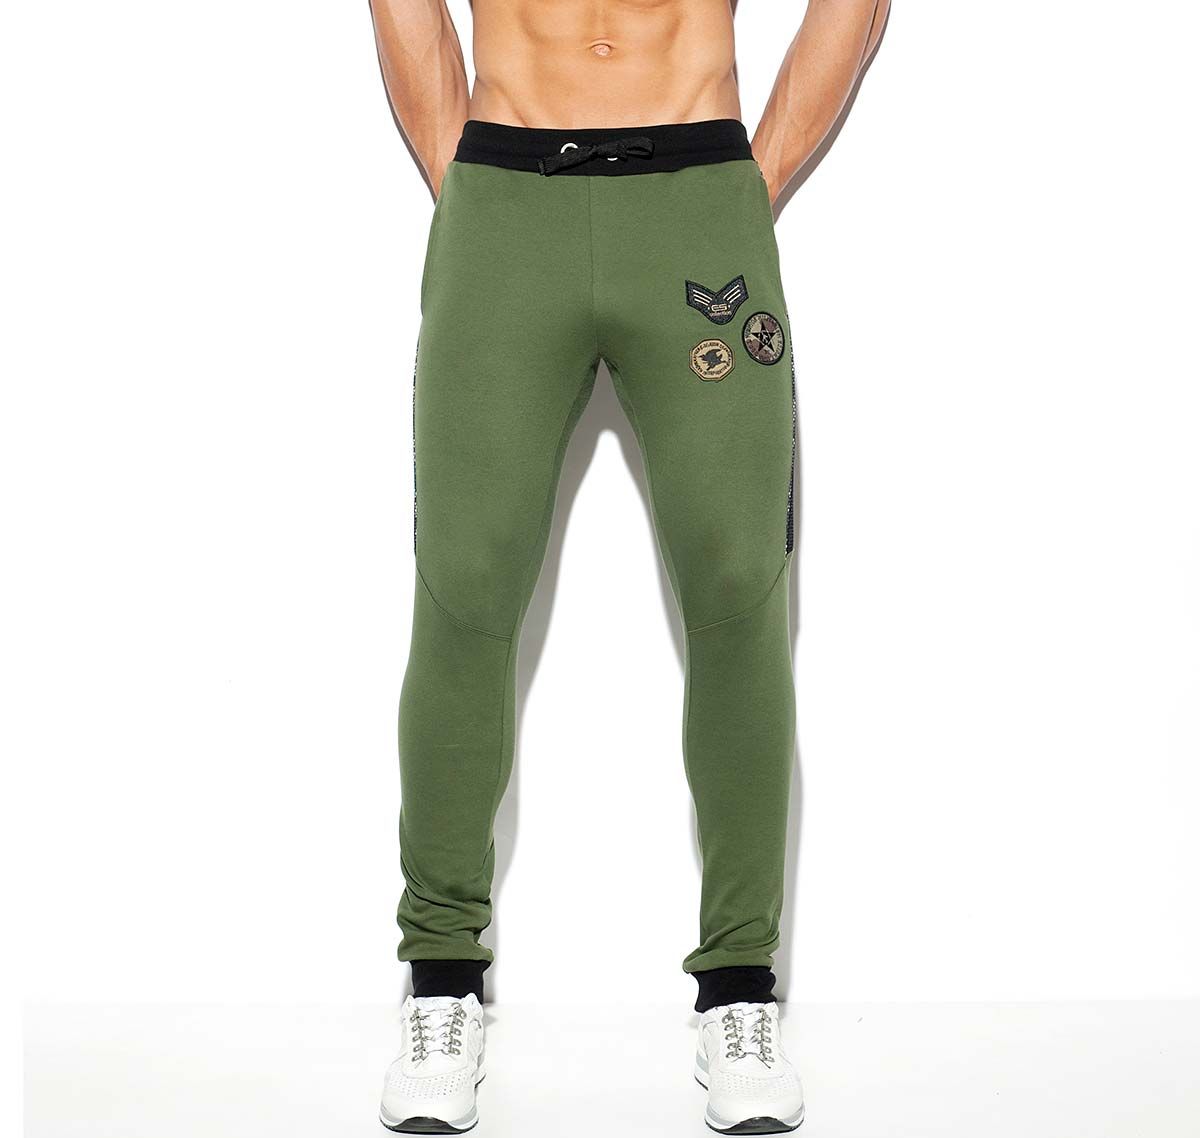 ES Collection Pantaloni sportivi lunghi ARMY PADDED SPORT PANTS SP221, verde